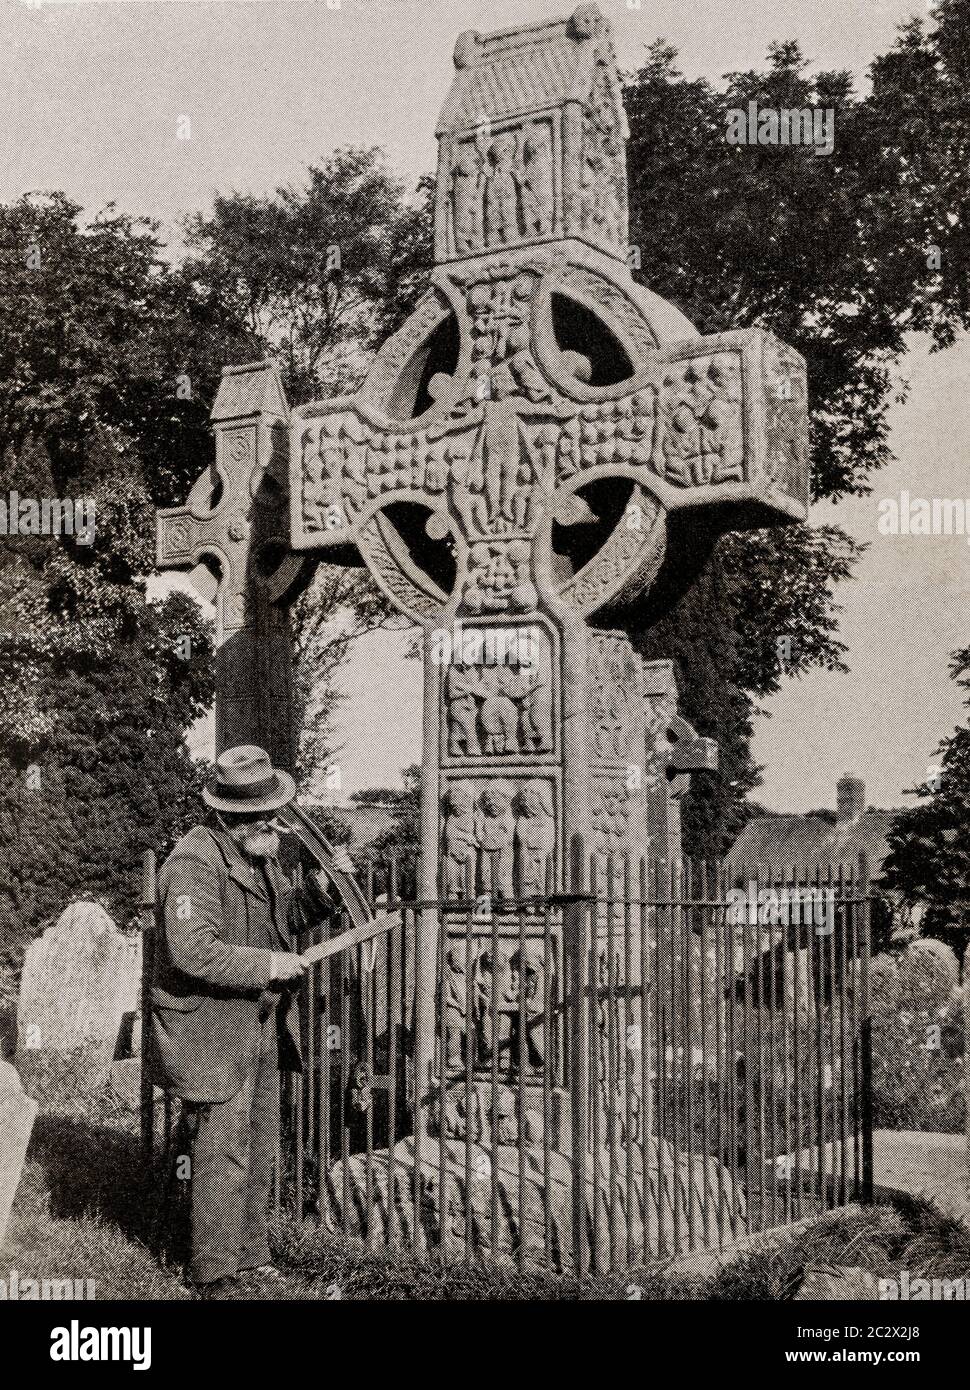 An early 1920's view of the 9th century, stone,  high cross in Monasterboice Monastery in County Louth, Ireland. Originally photographed by Clifton Adams (1890-1934) for 'Ireland: The Rock Whence I Was Hewn', a National Geographic Magazine feature from March 1927. Stock Photo